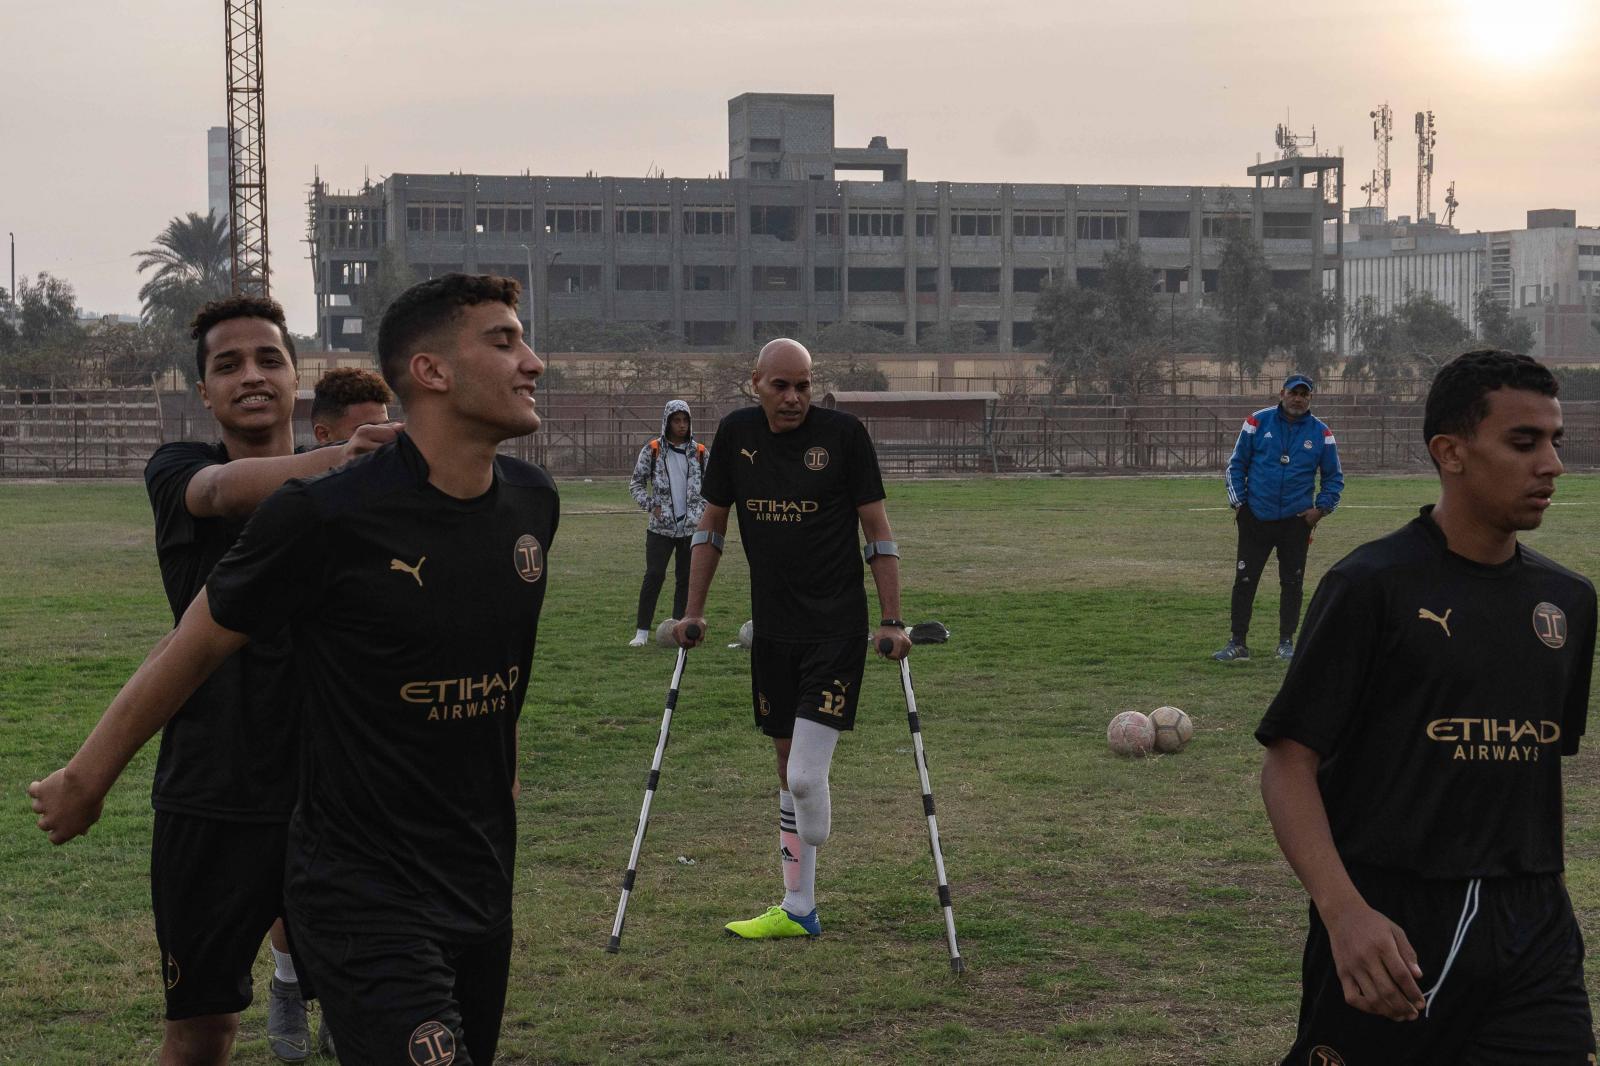 Mohamed Gaber 43 years old is a...so he can buy a prosthetic leg.